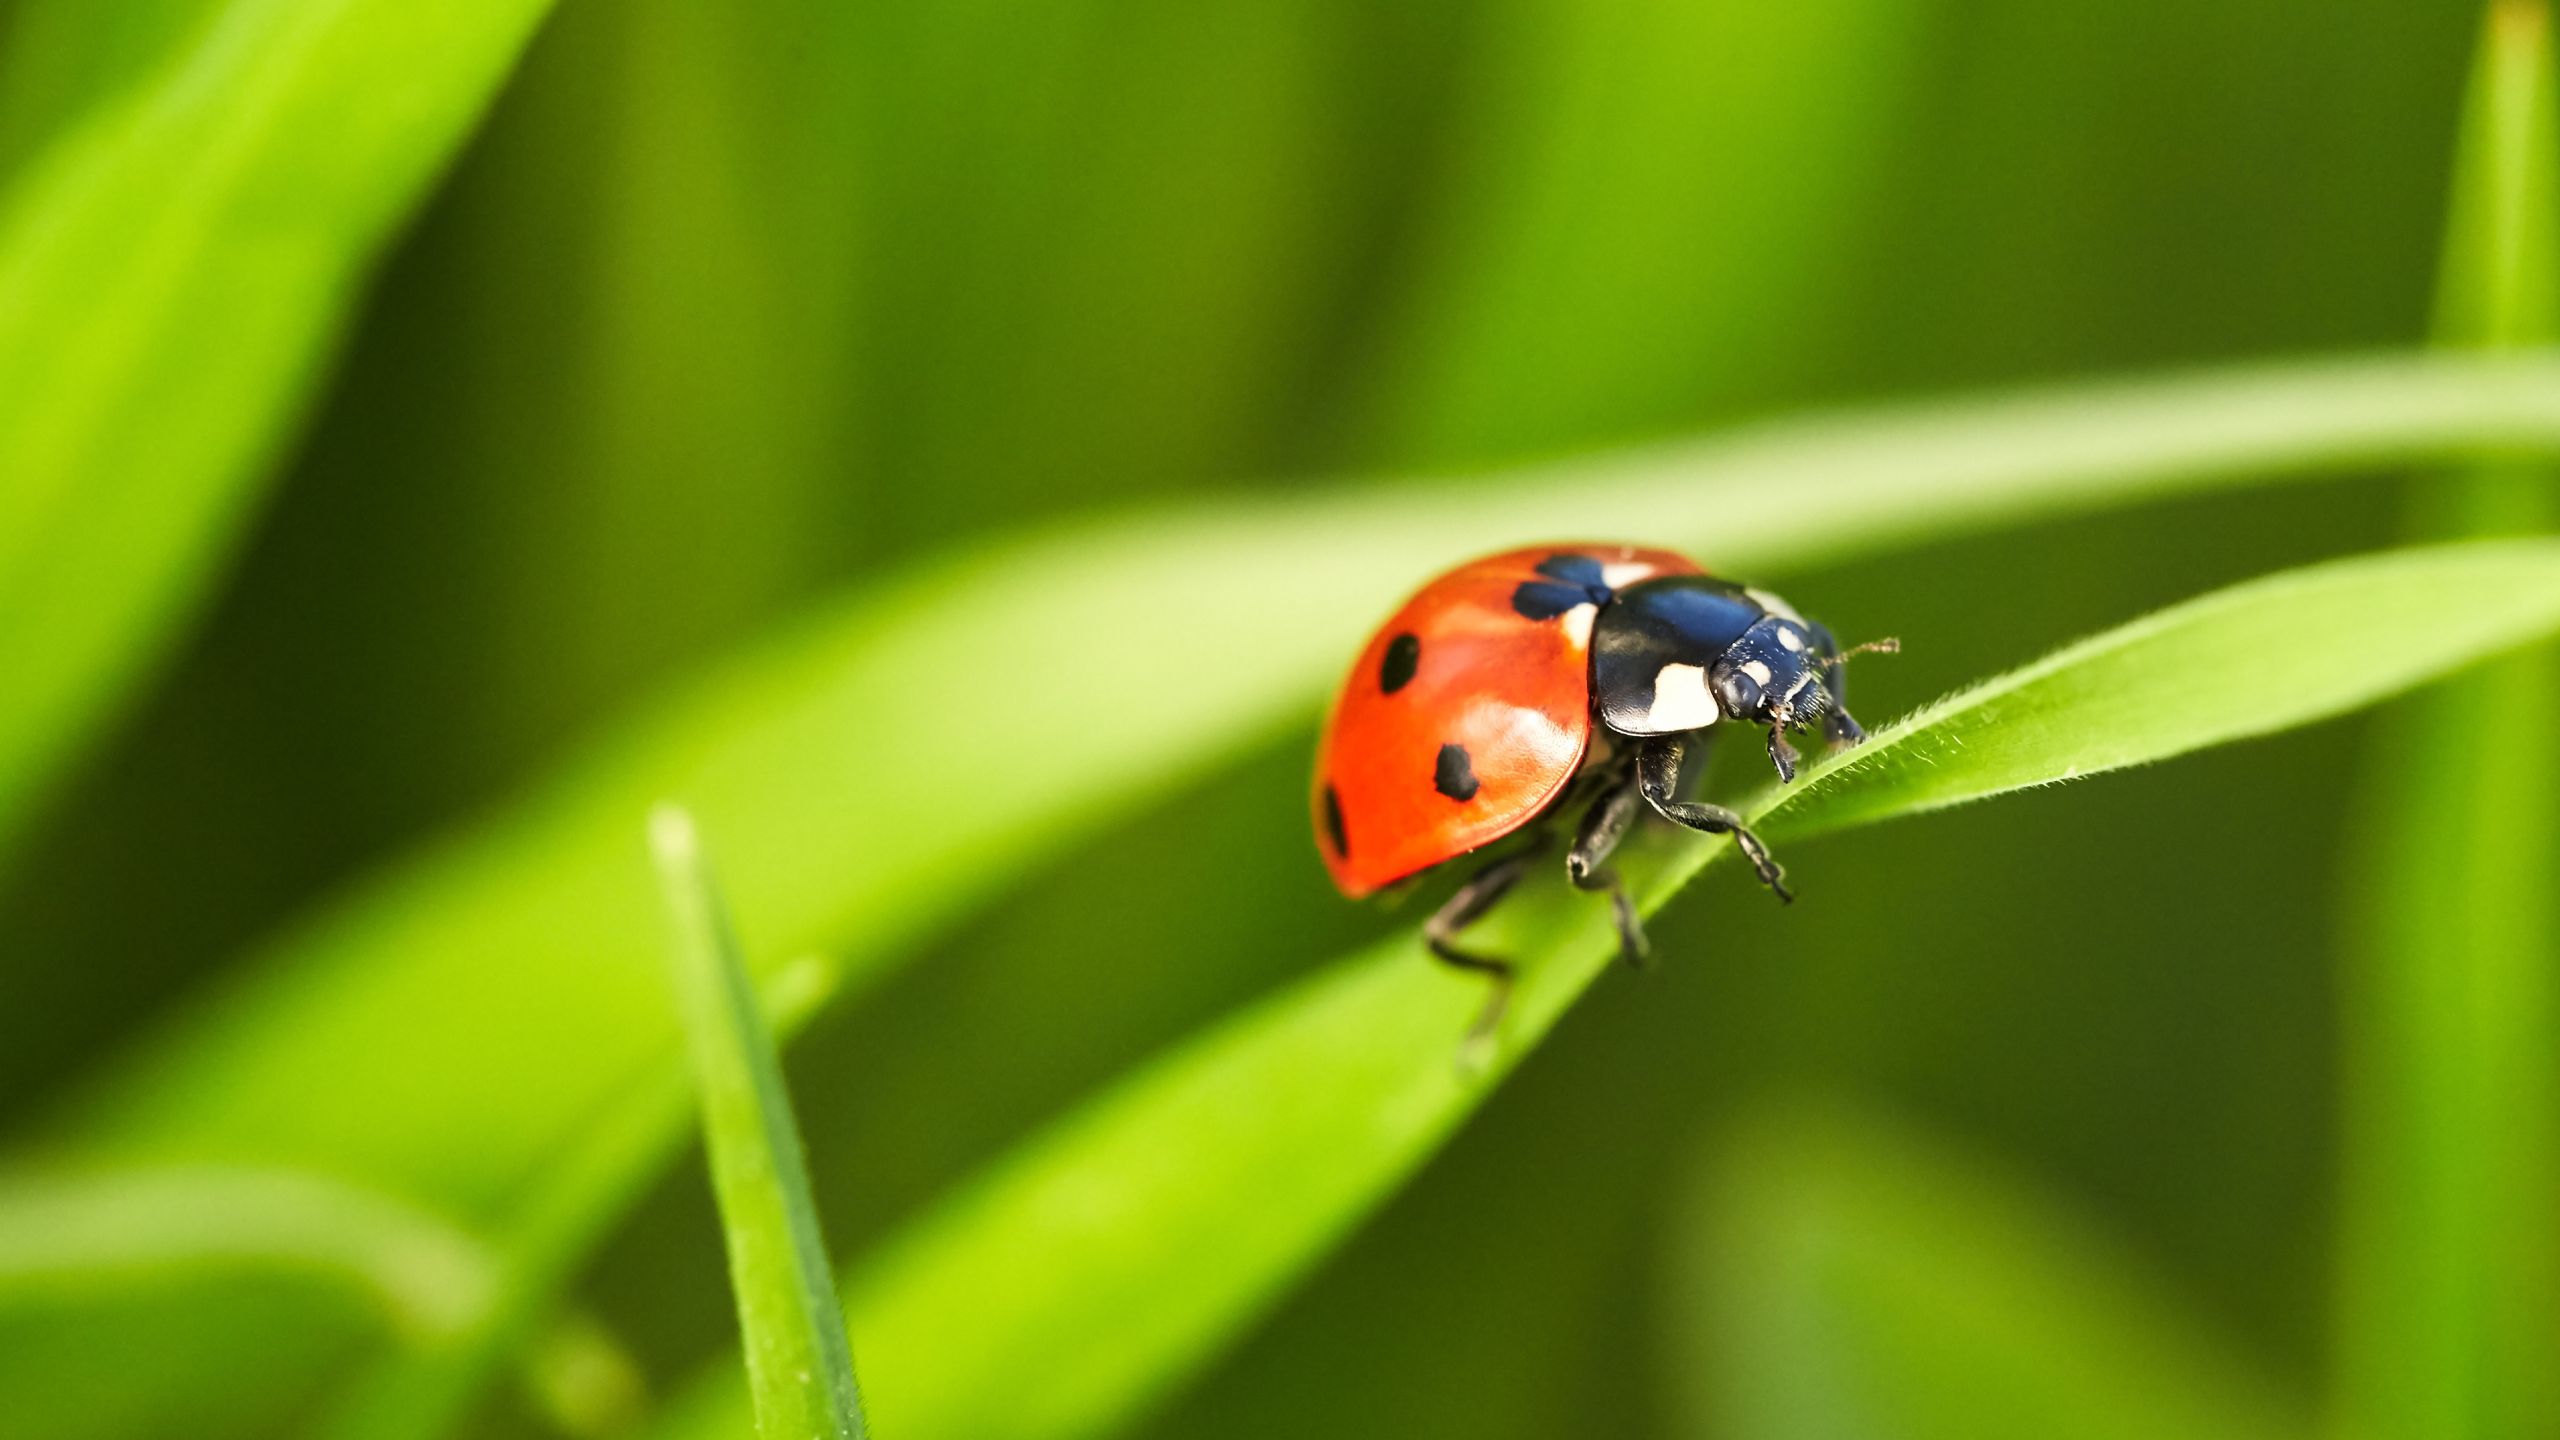 Red Ladybug - Learn About Nature